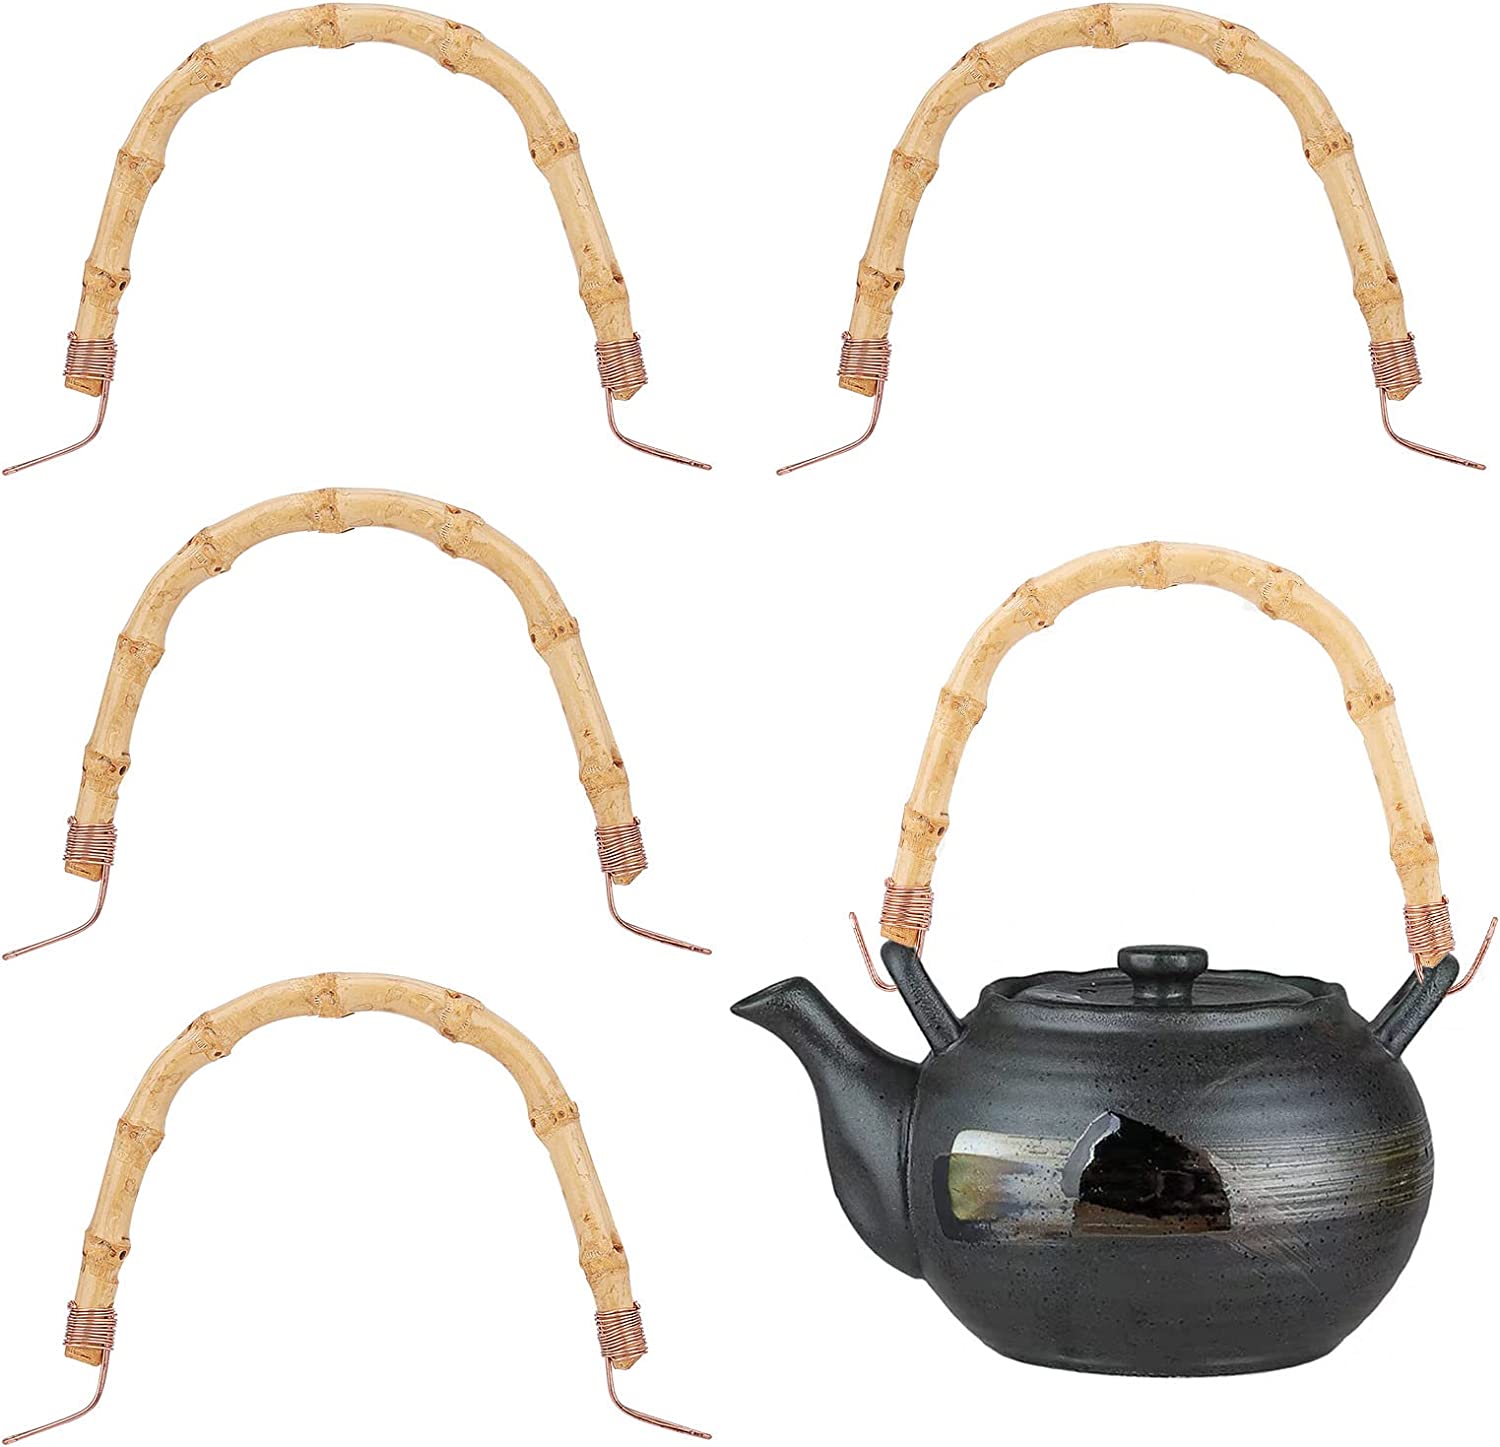 4pcs Bamboo Teapot Handle U-Shape Handle Replacement Kung Fu Teapot Accessories Supplies for Ceramic and Pottery Tea Pots Handle Purses - image 1 of 7